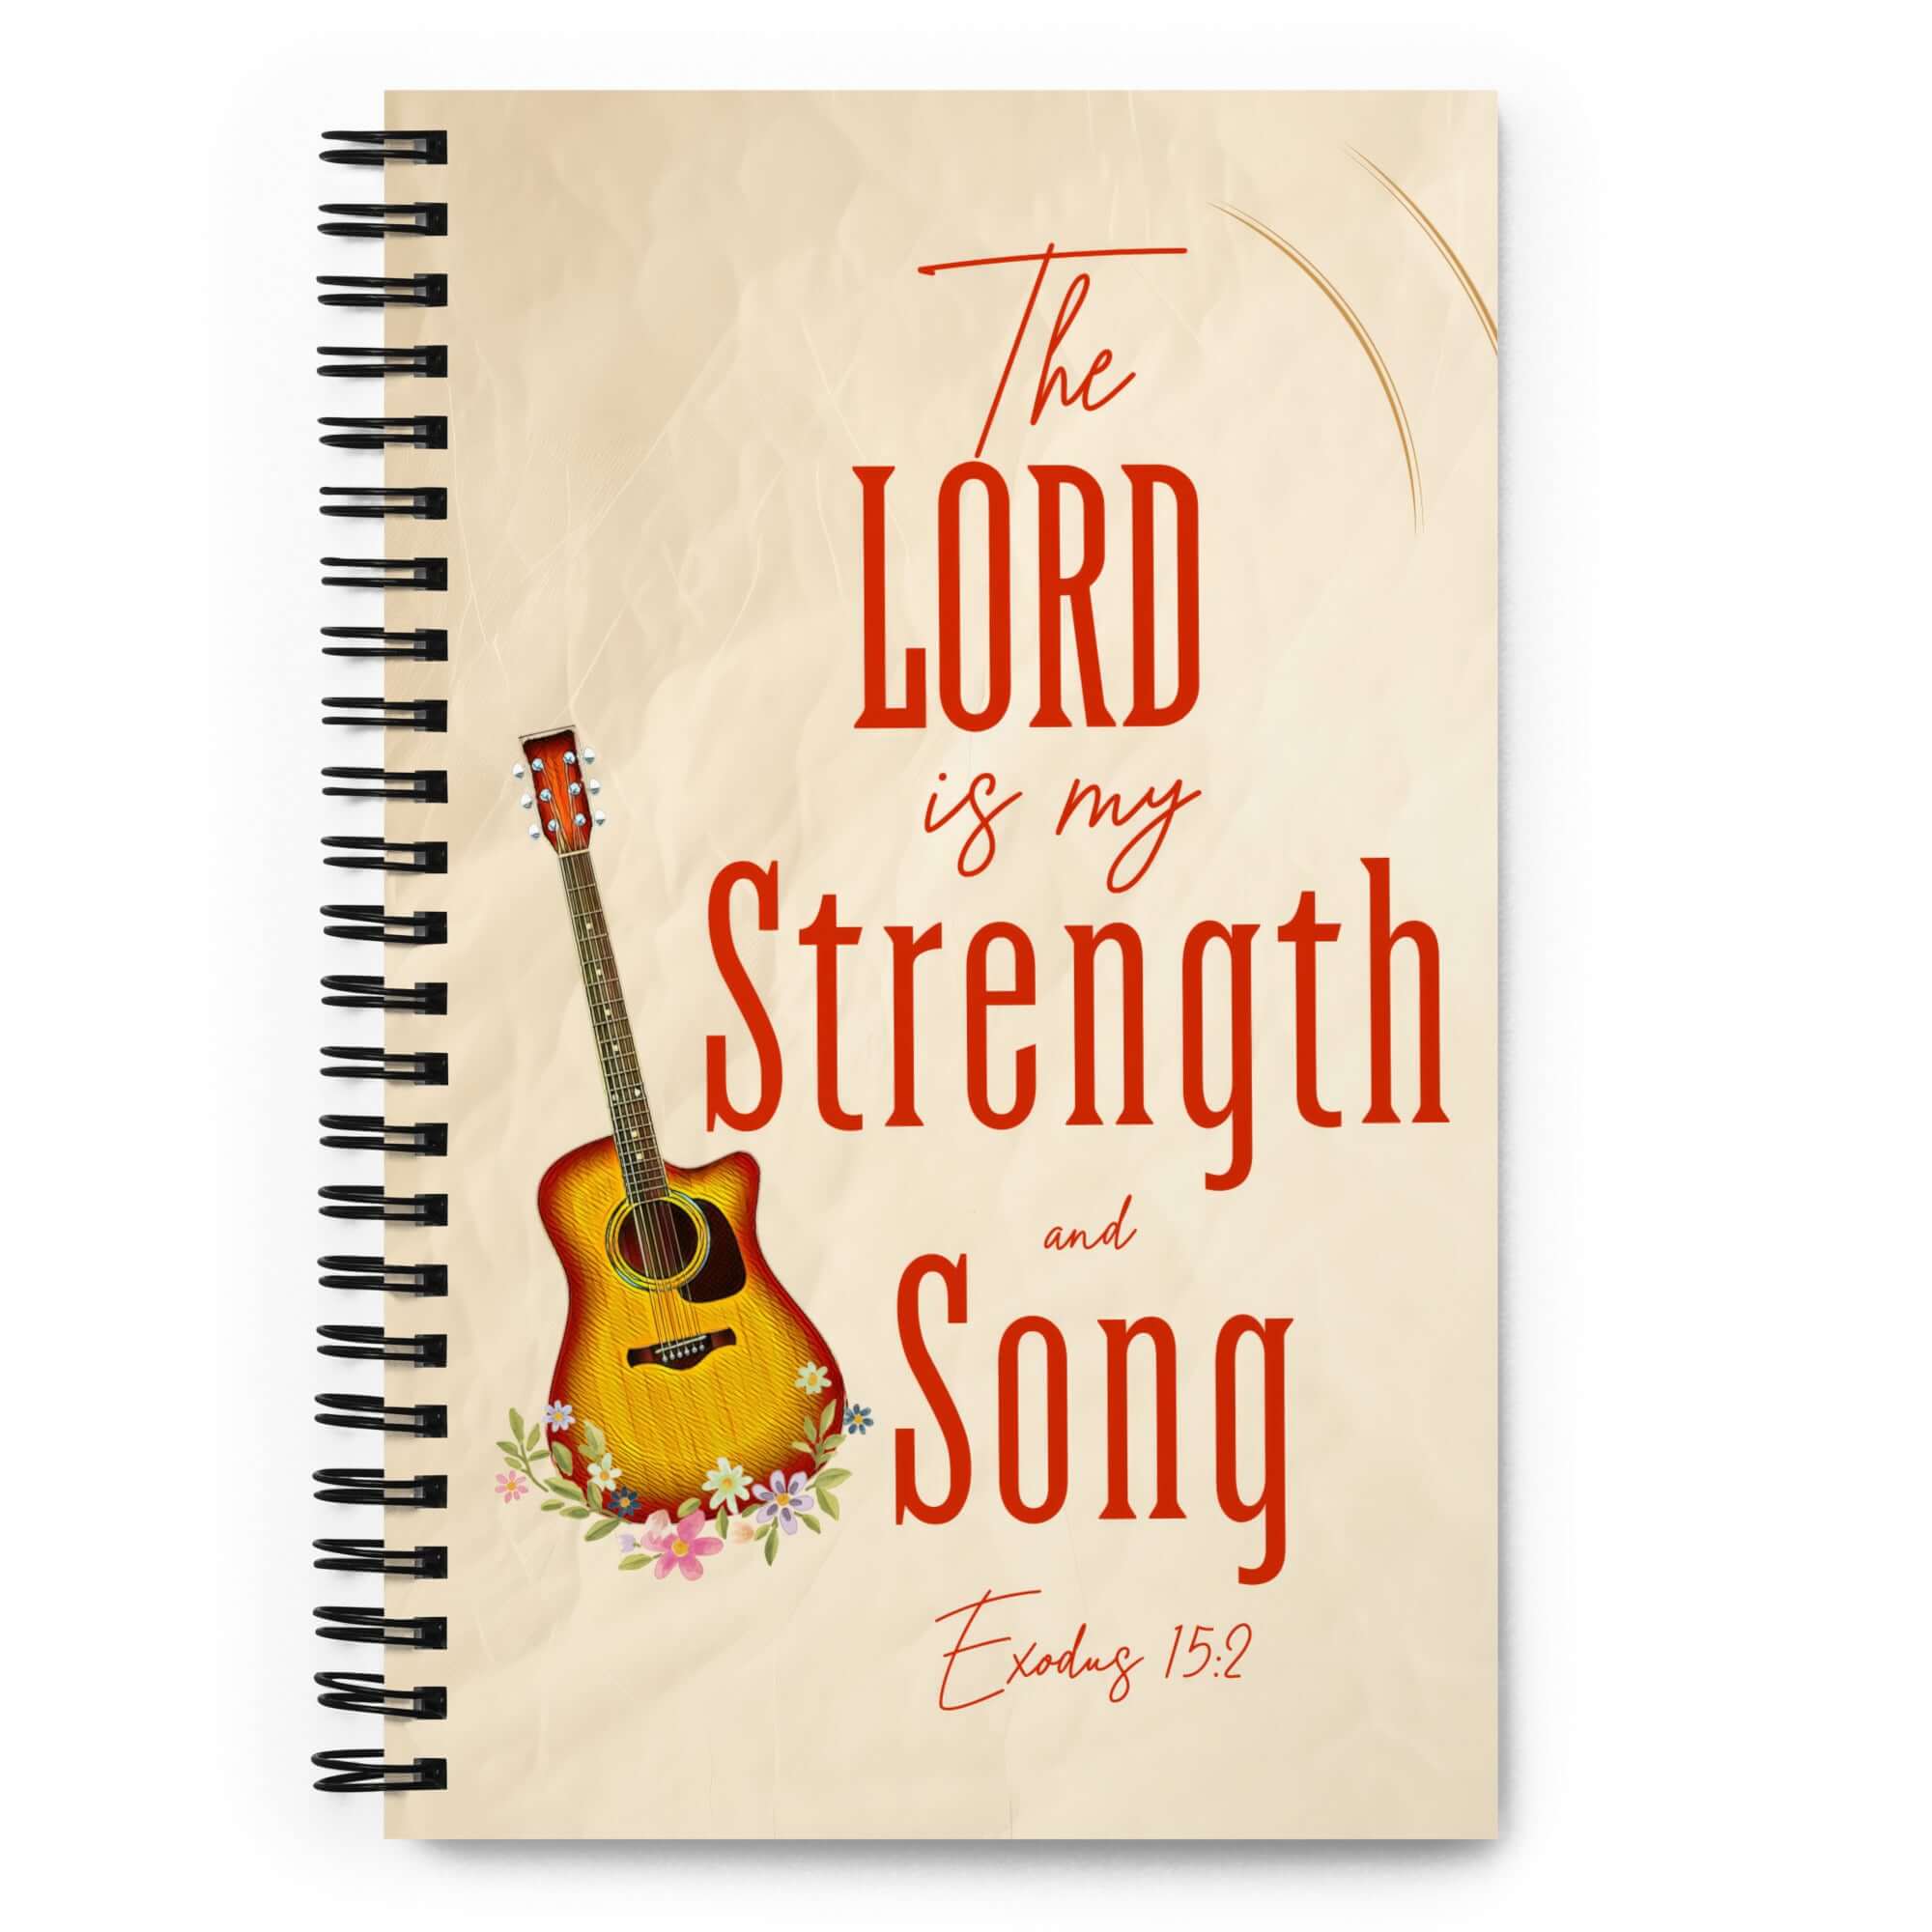 Exodus 15:2 - Bible Verse, The LORD is my strength Spiral Notebook